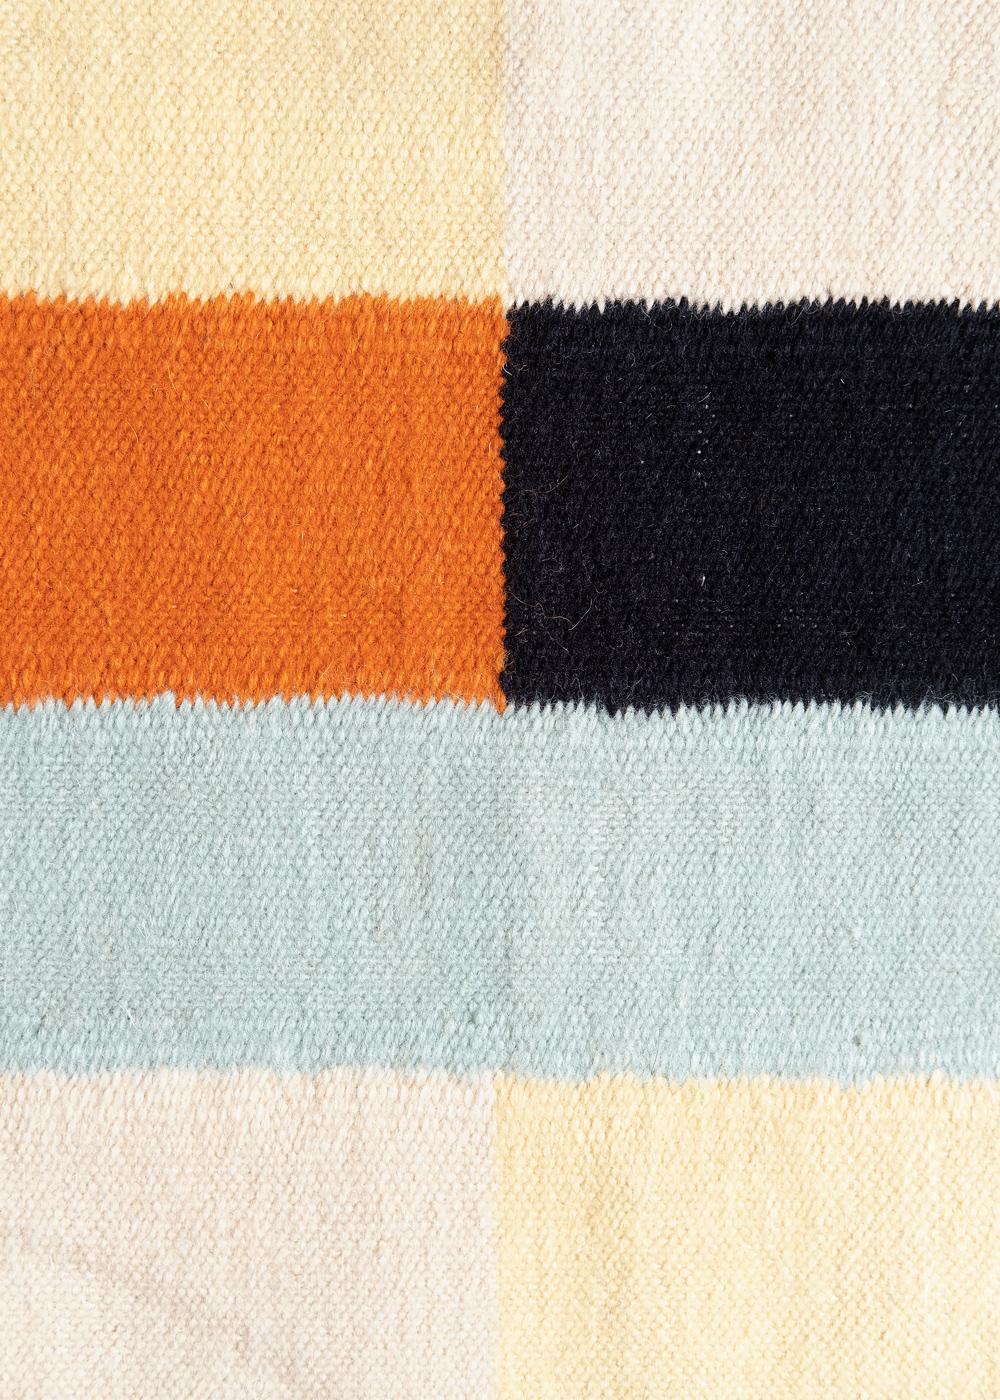 Holy Spice - Design Kilim Rug Liver Studio Milan Wool Carpet Cotton Handwoven

This Rugs is designed by Liver, a creative studio based in Milan, Italy. Composed from a geometrical grid, colours overlap and combine with vibrancy.

handmade in India,